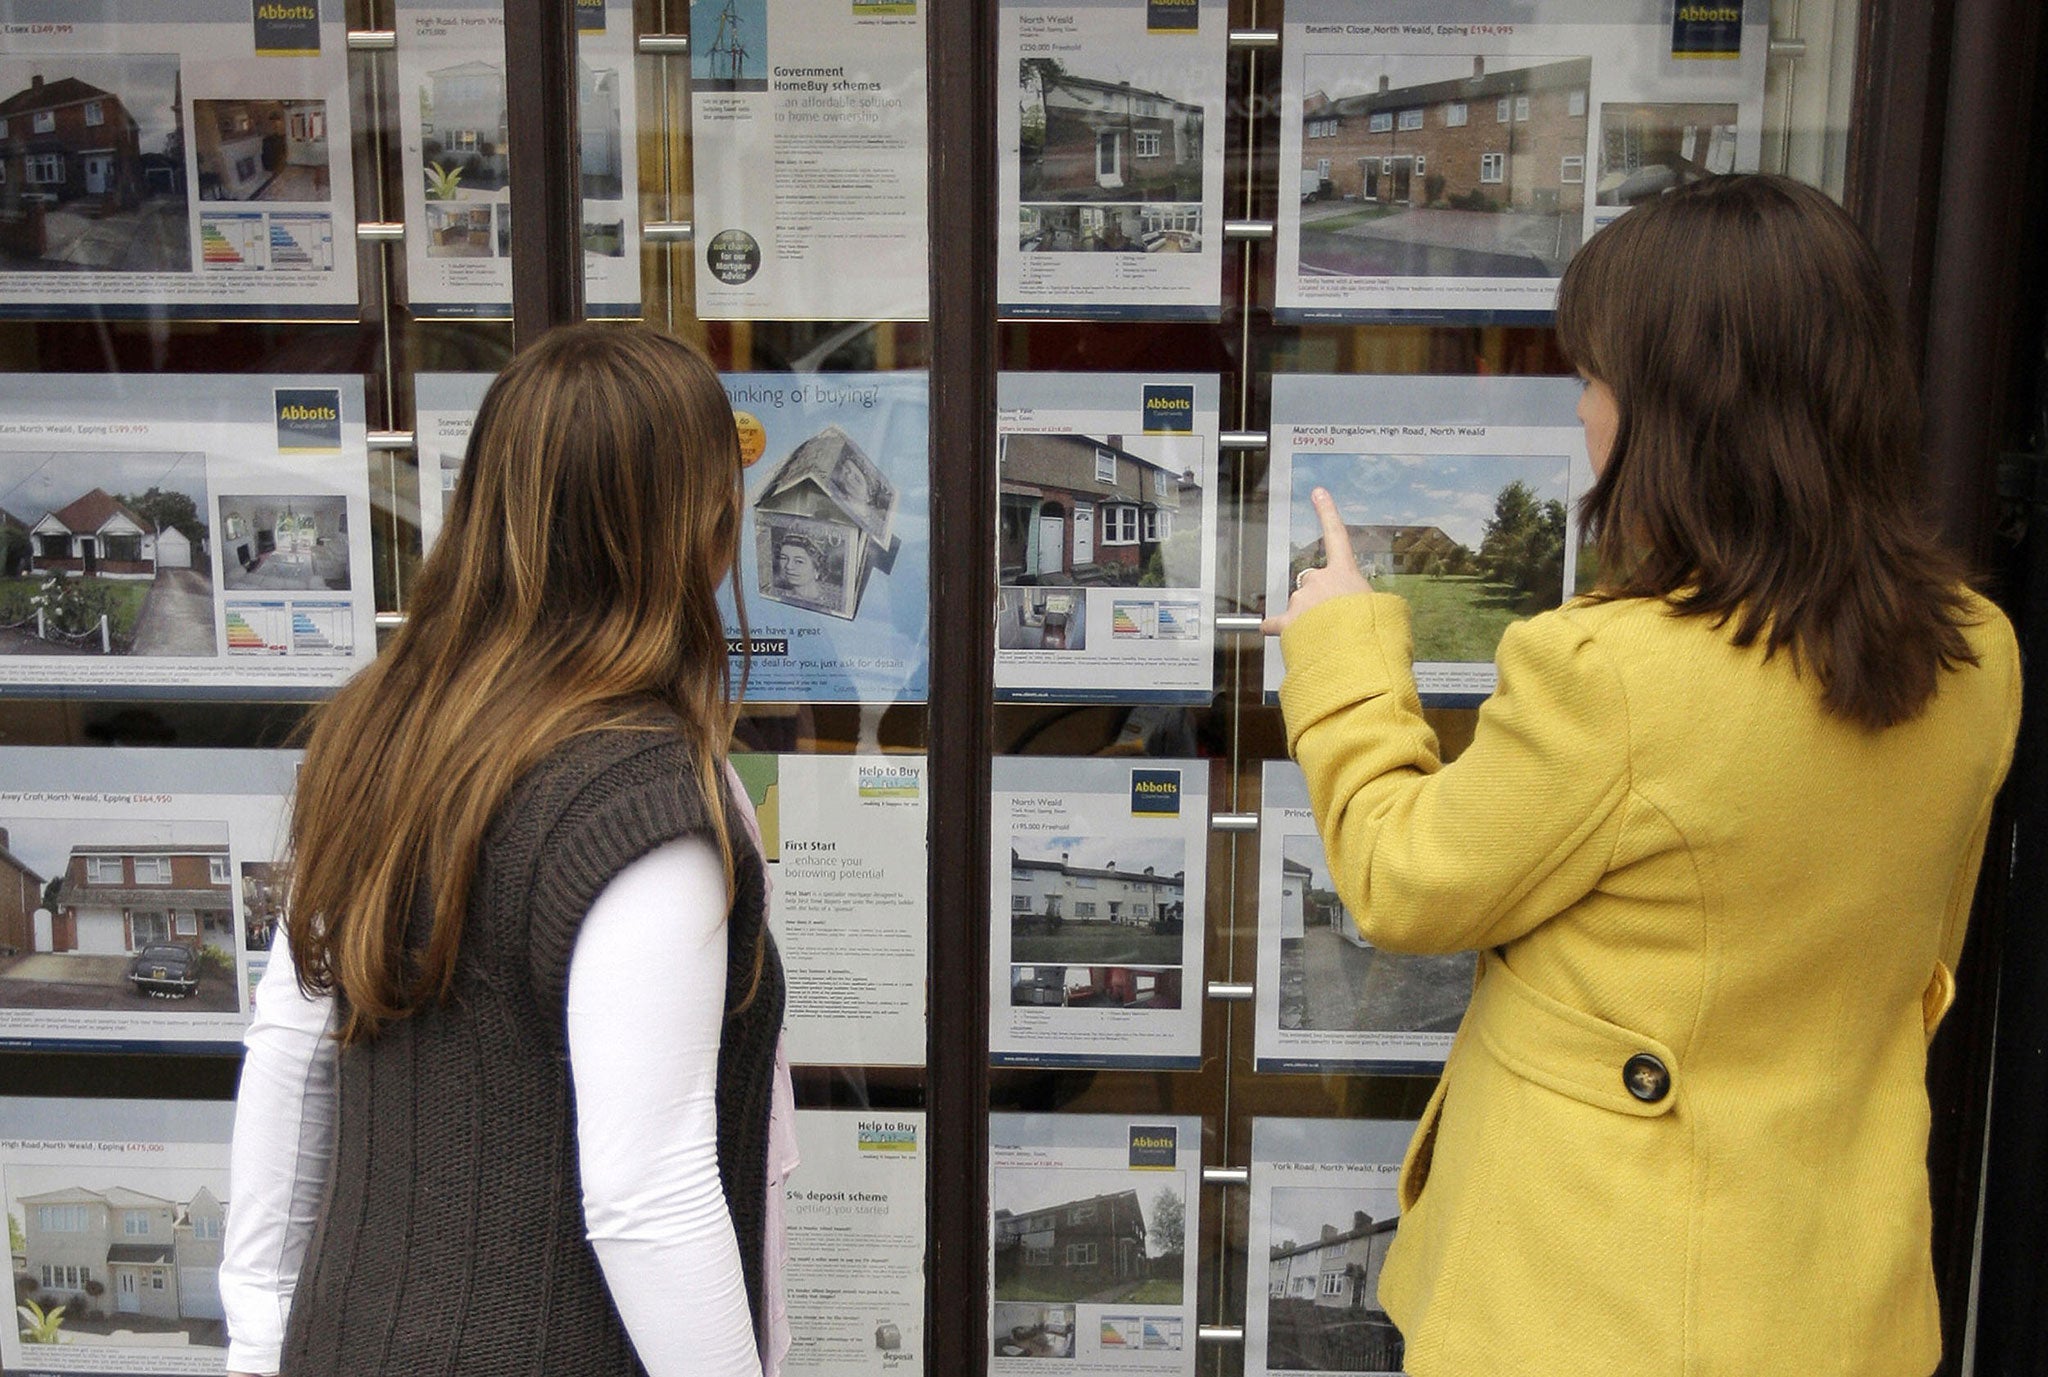 The number of mortgages approved by British banks last month dropped to 40,103 from May's downwardly revised 41,842